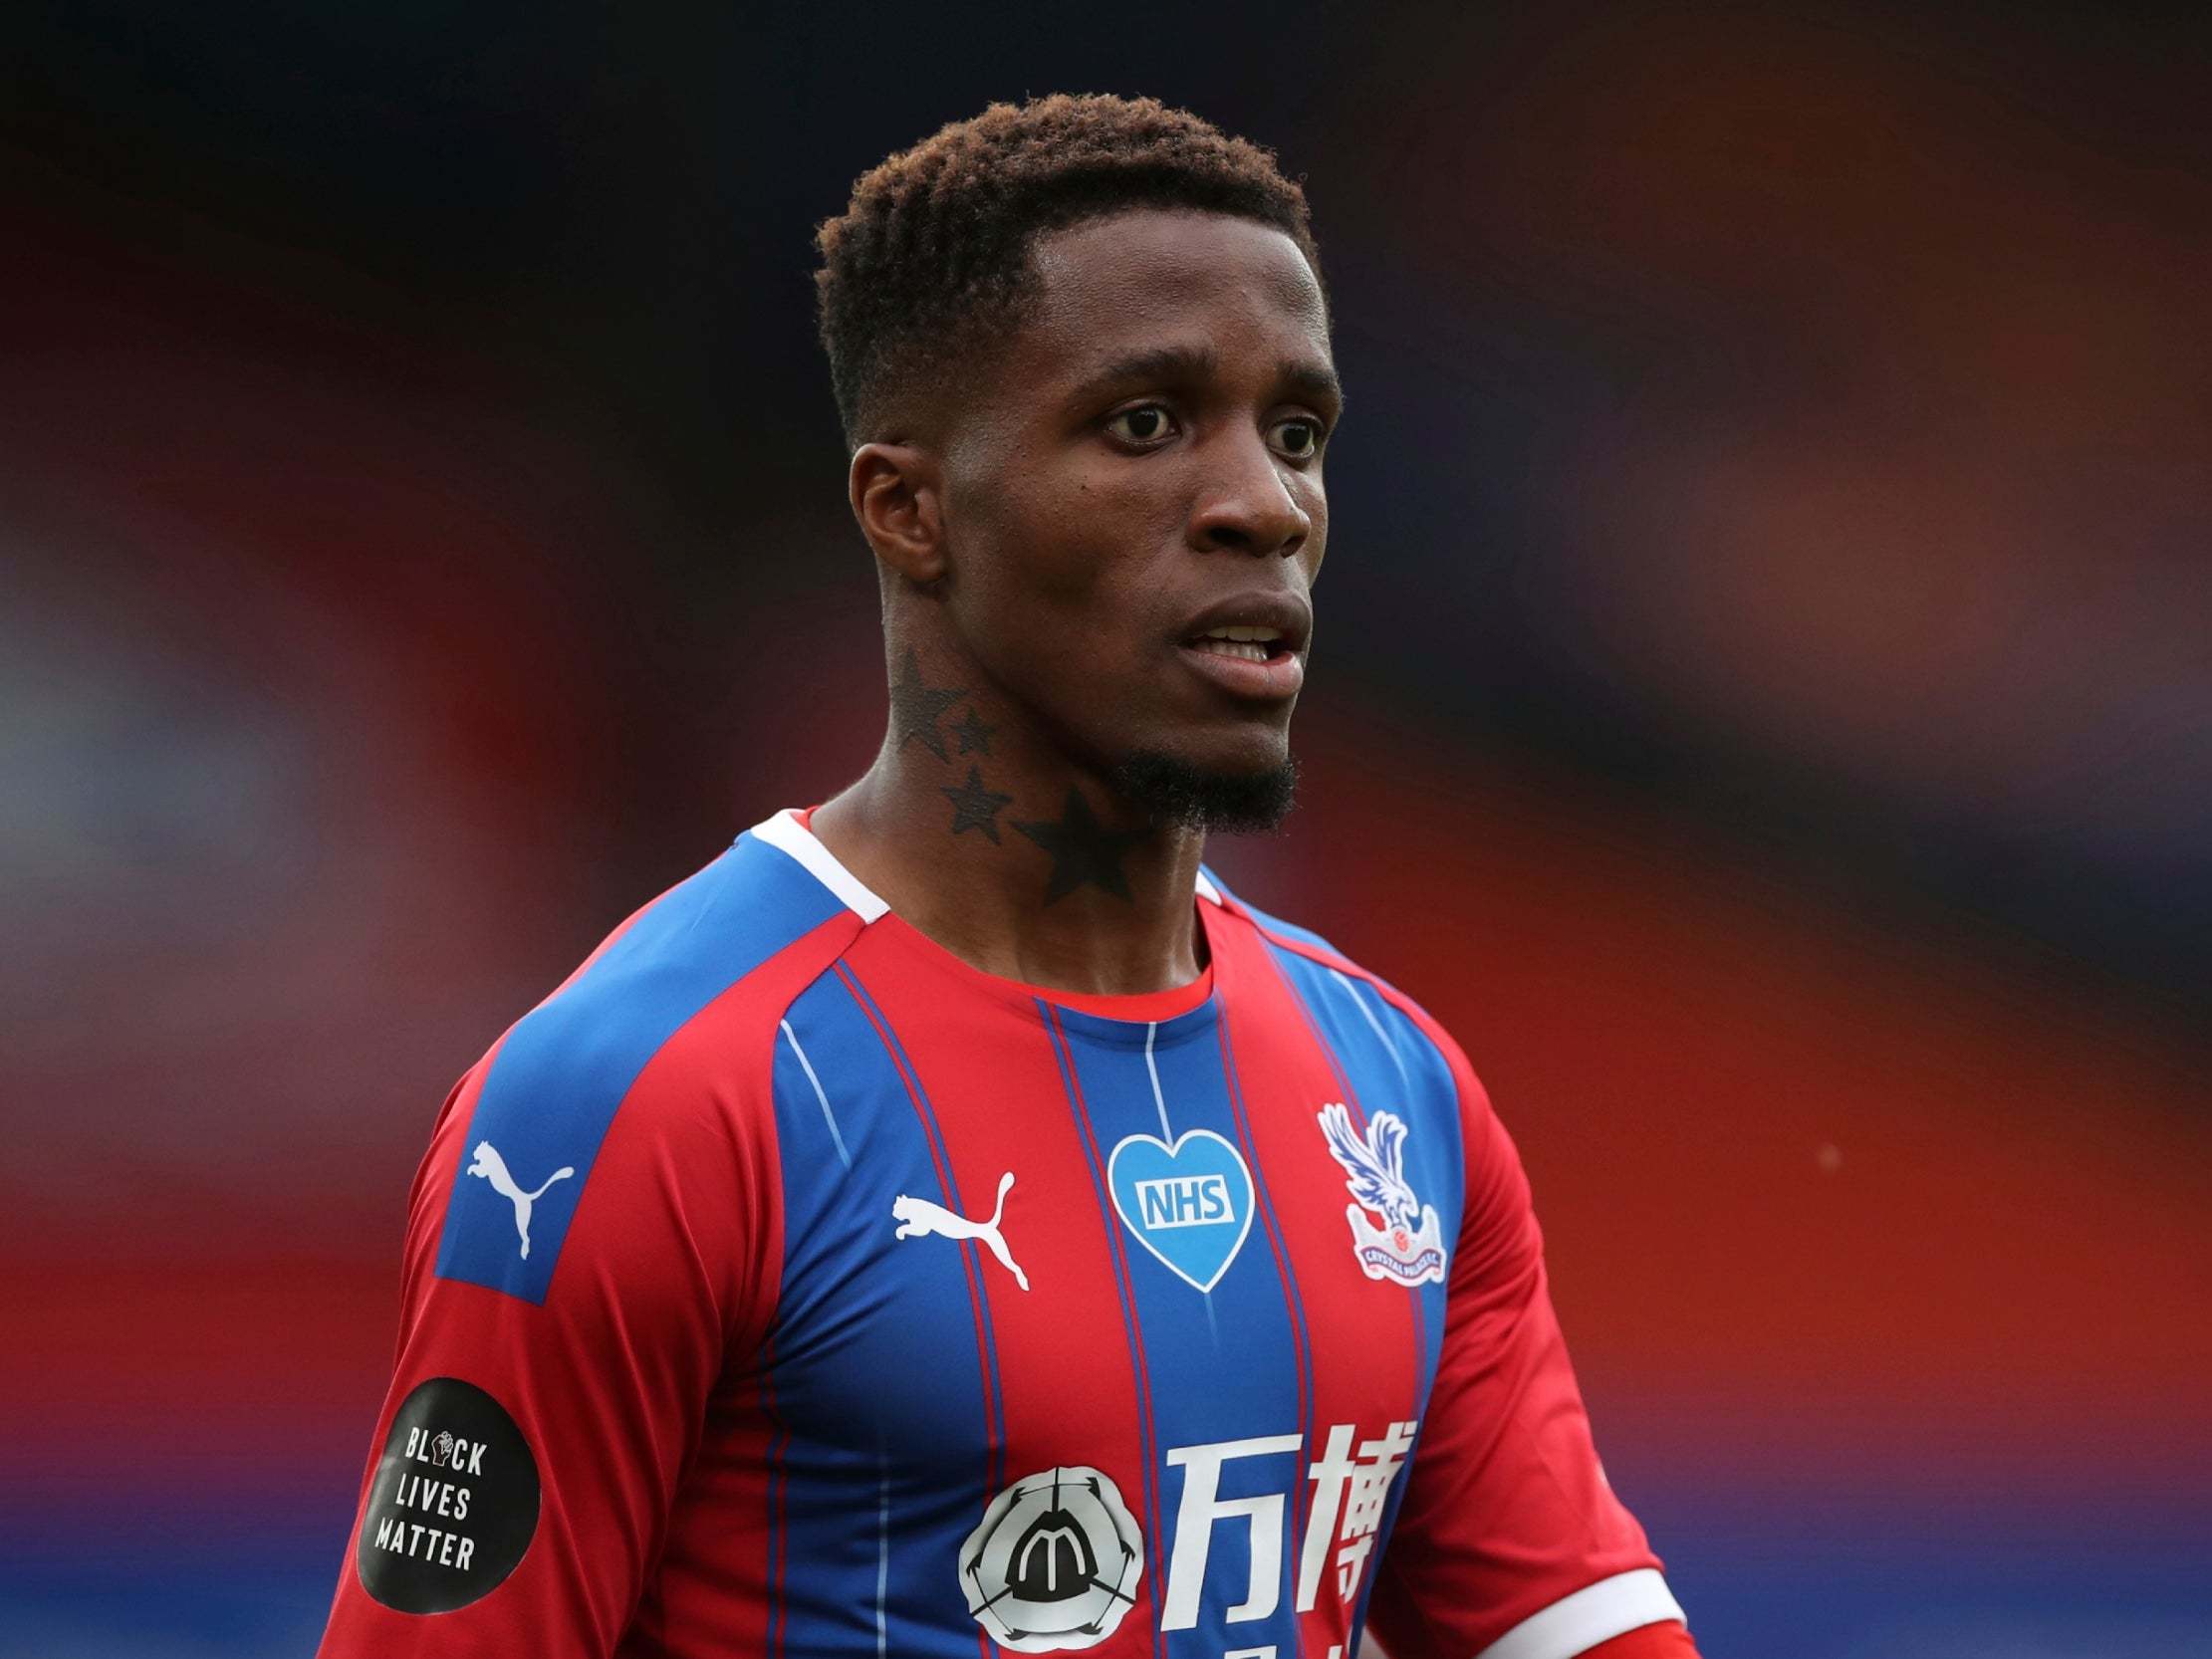 Wilfried Zaha was targeted by racist abuse online